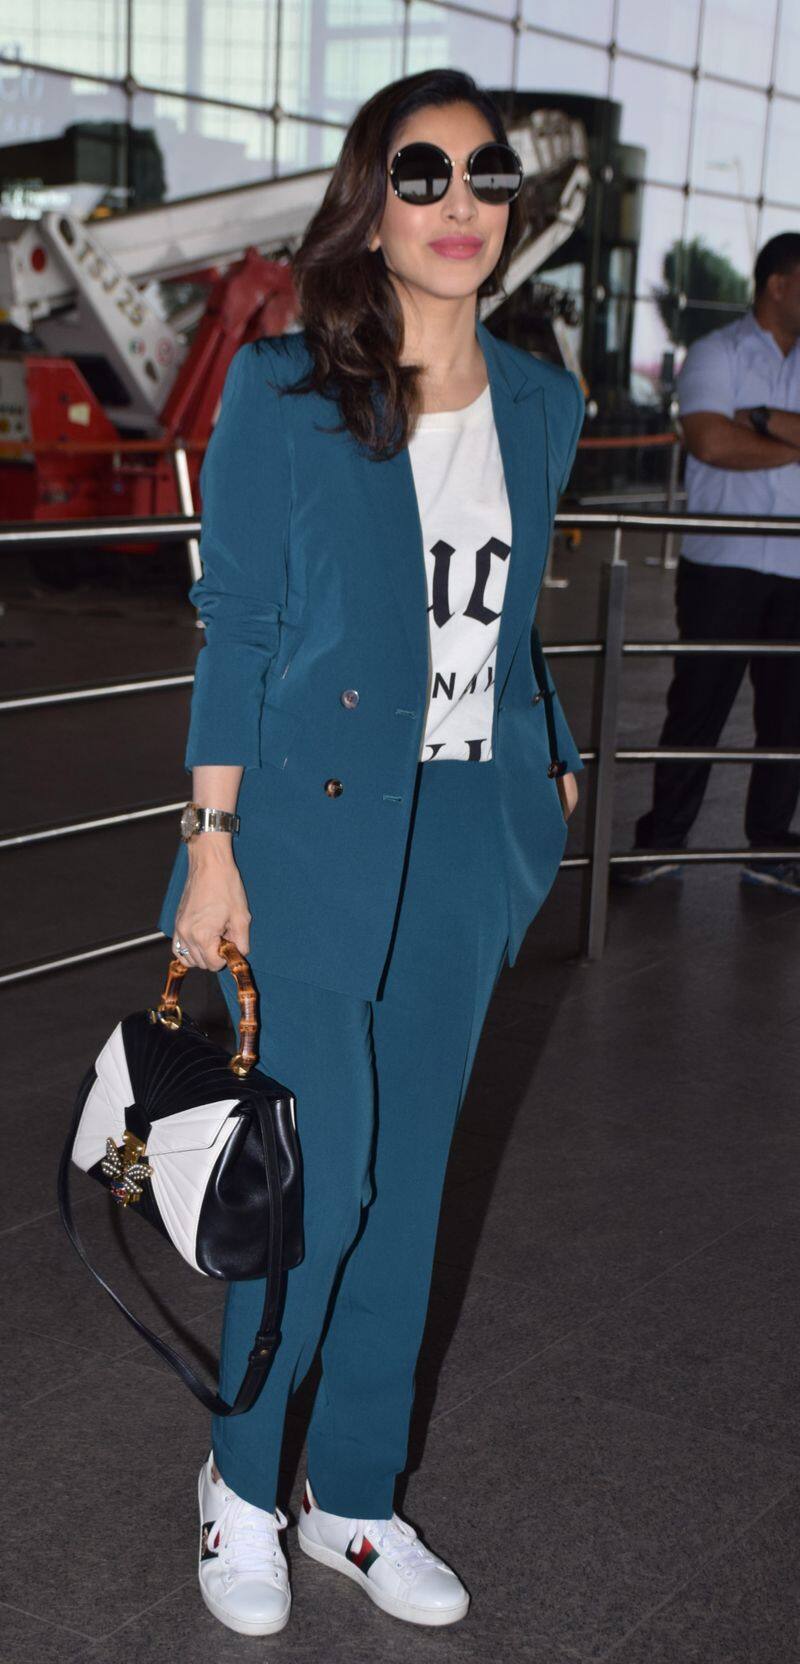 Winter formal wear does not always have to be black or brown. Get inspired by Sophie Choudry to stay snug in a teal pantsuit.